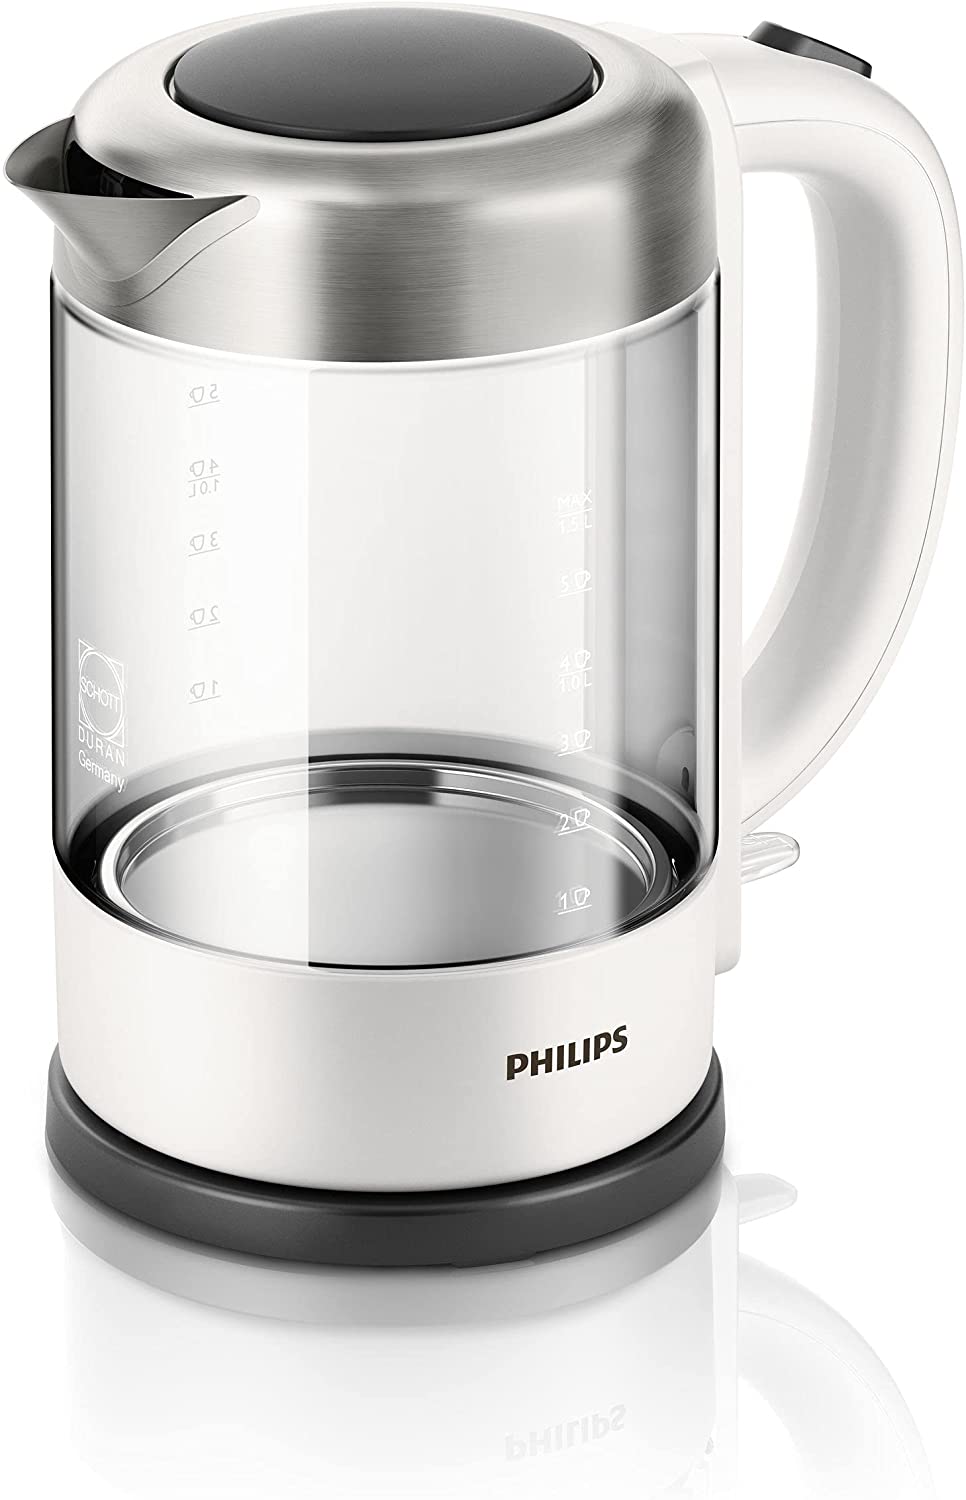 Philips HD9340/00 Viva Collection Glass Kettle High-Quality Schott Duran Glass, 2200 W, 1.5 L